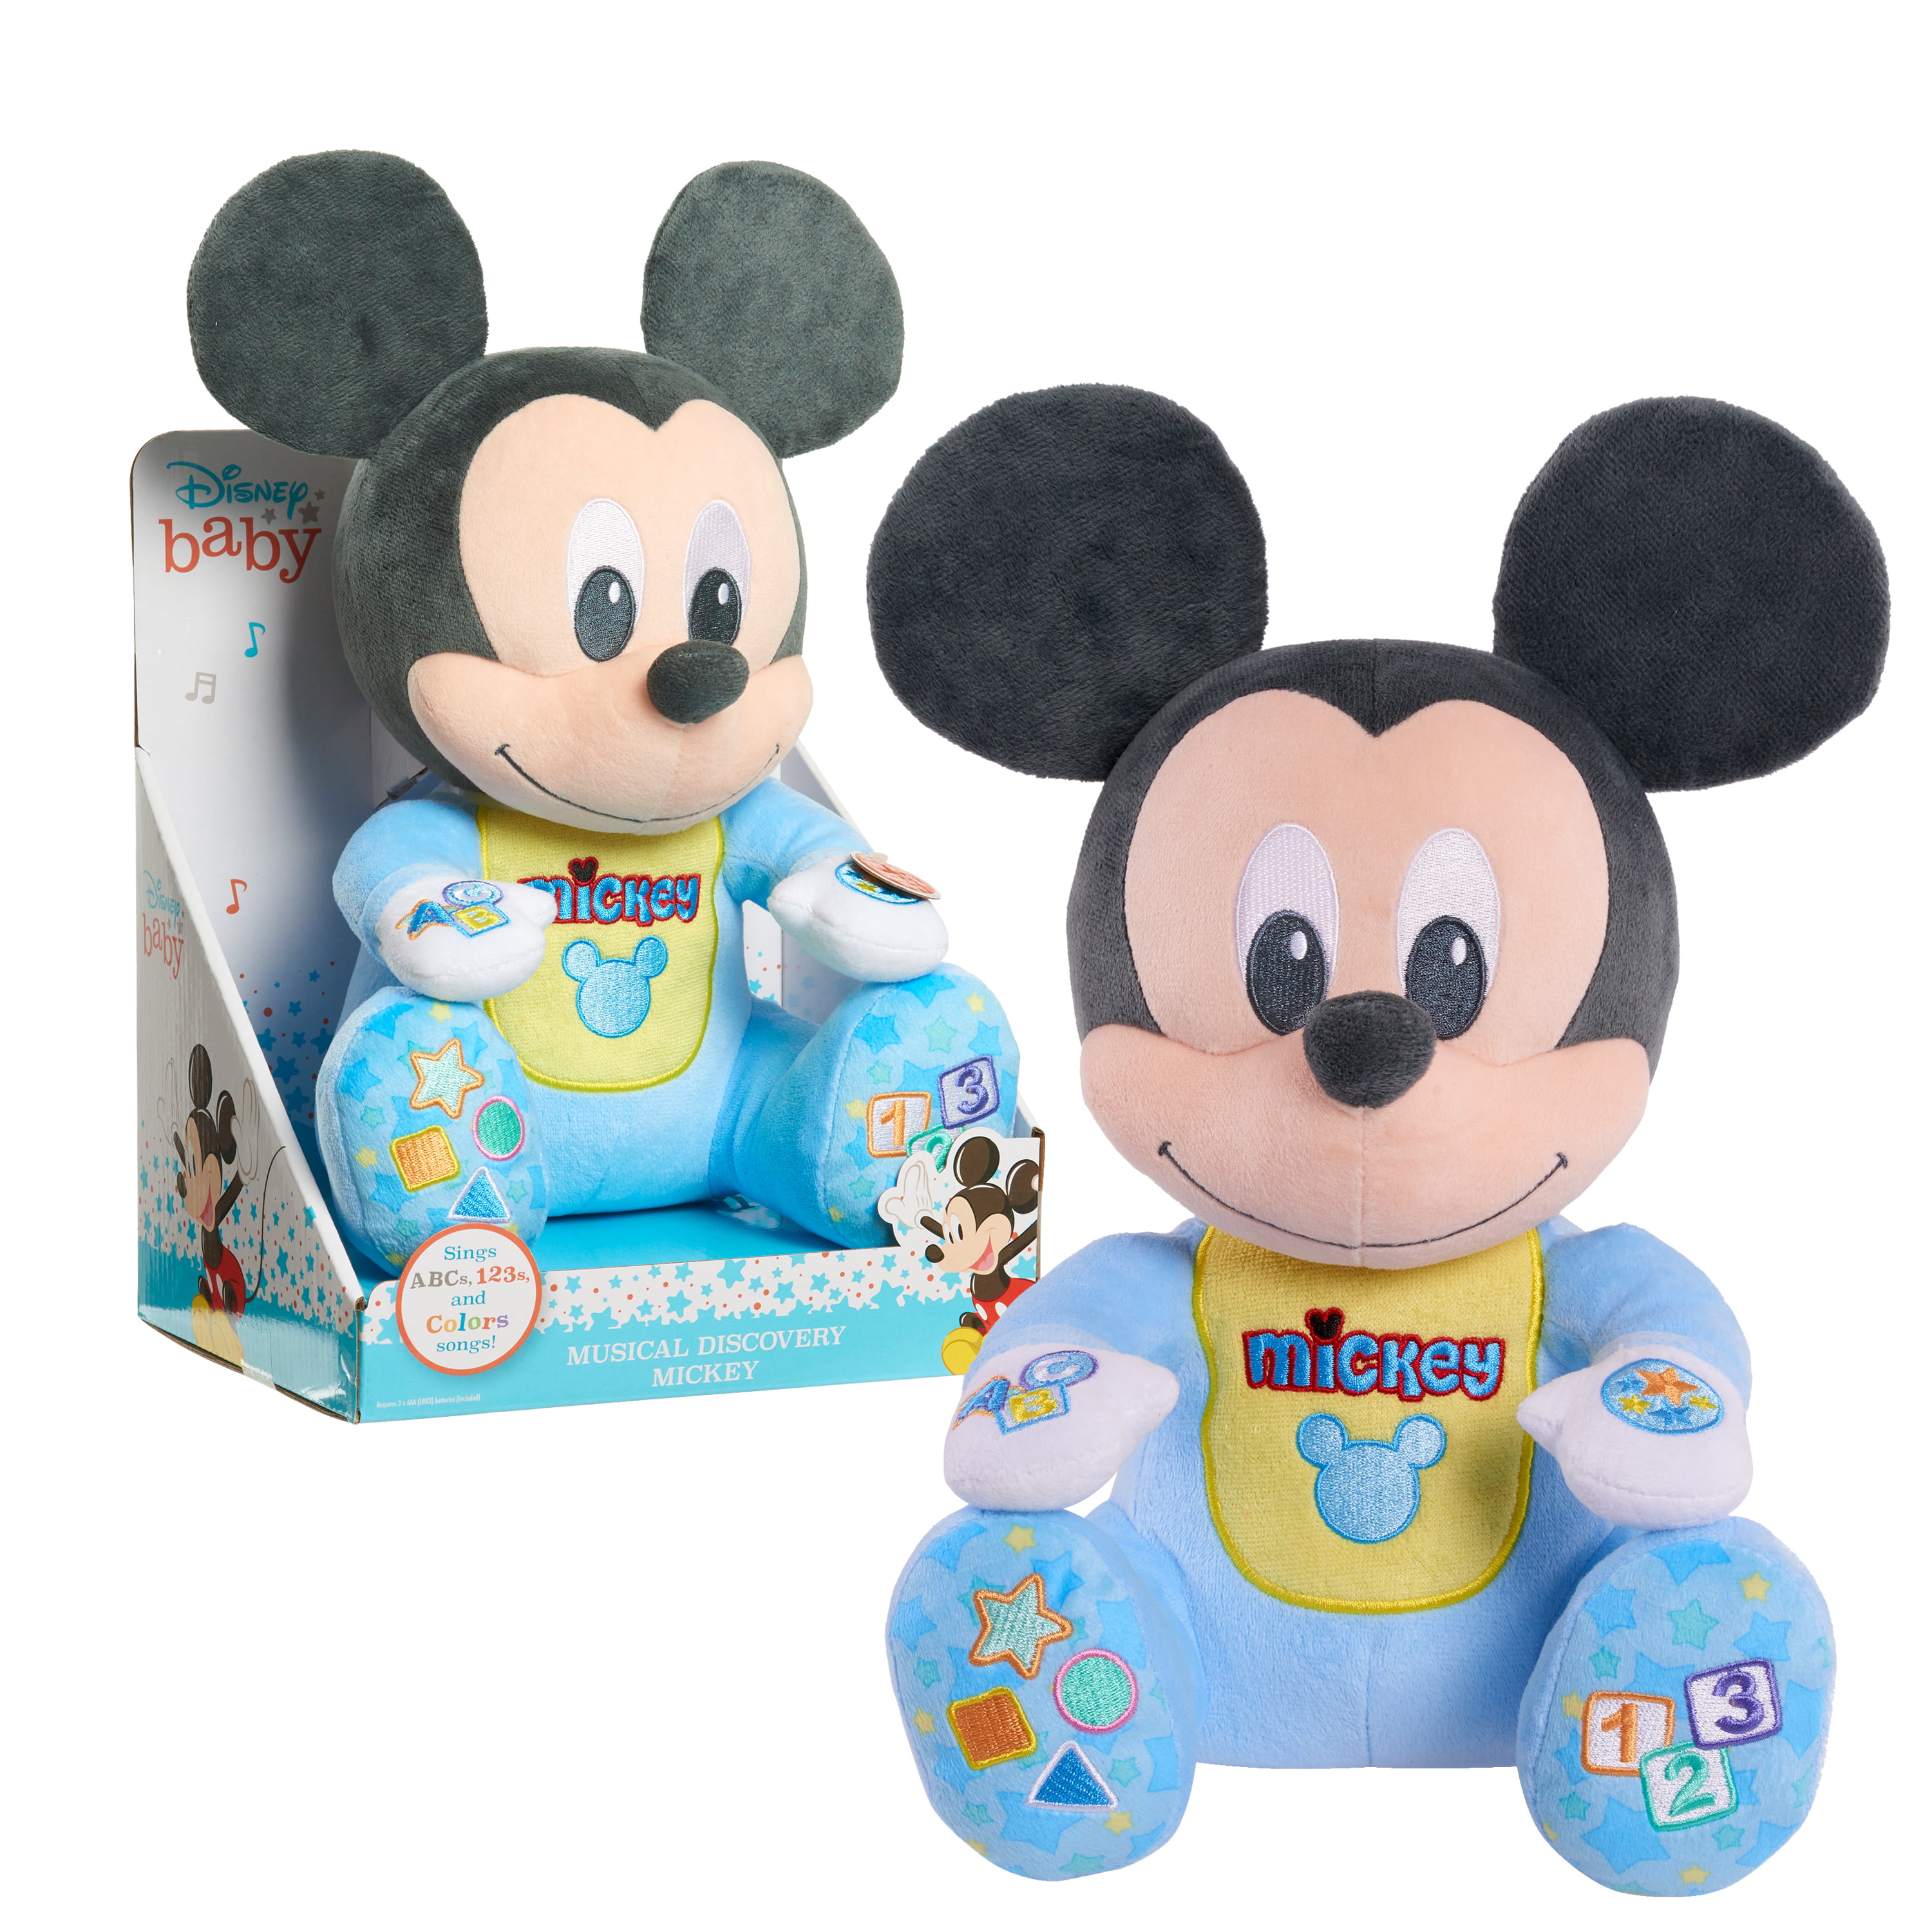 Disney Baby Musical Discovery Plush Mickey Mouse, Ages 06+